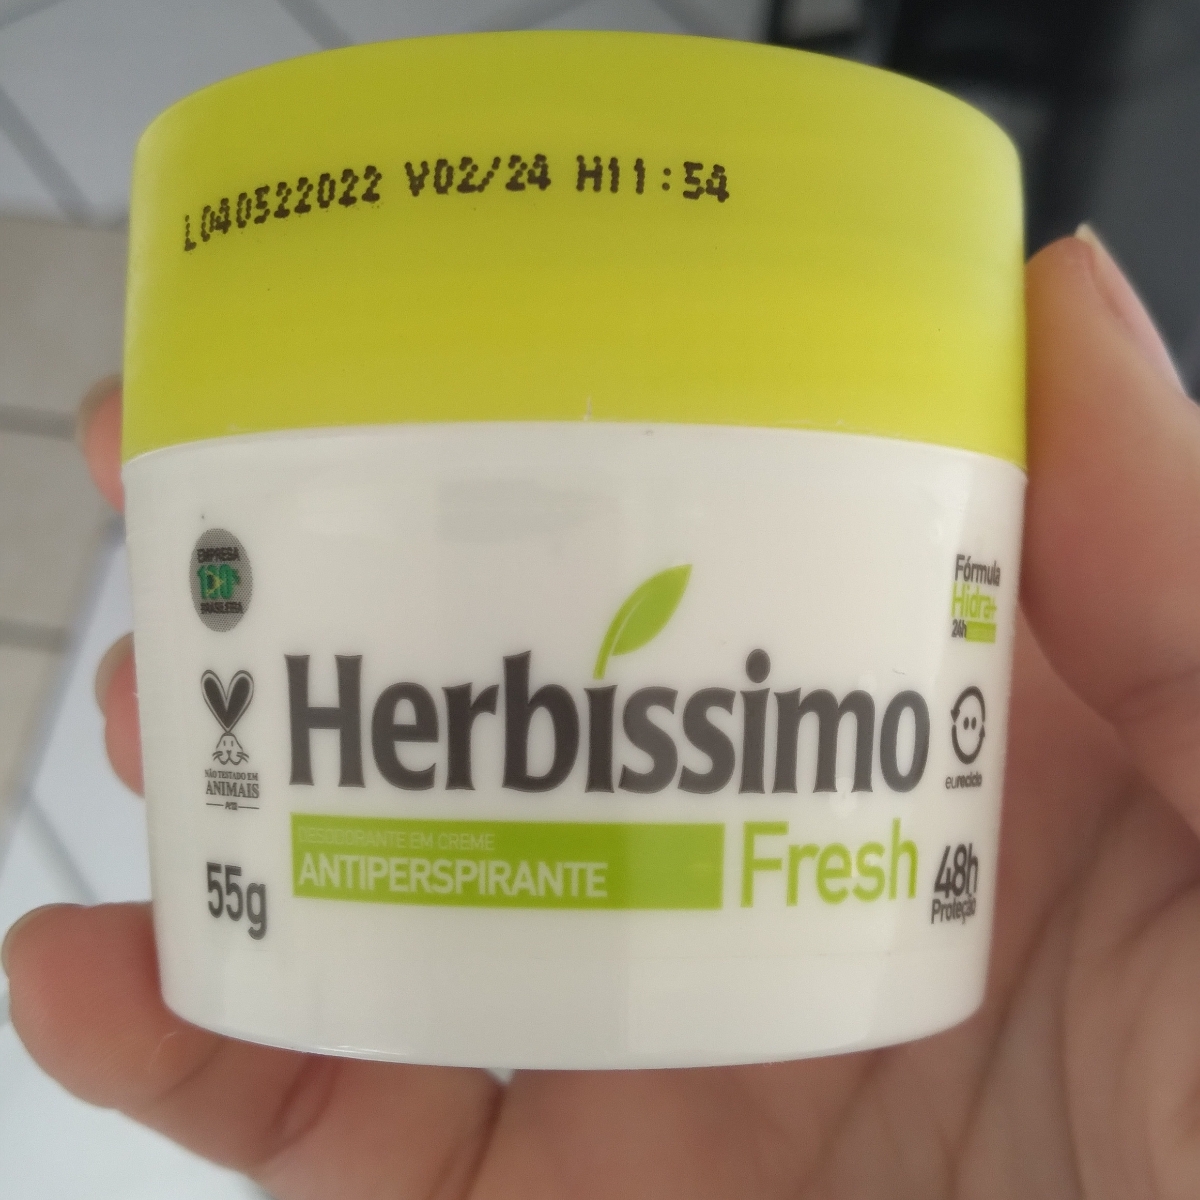 Herbissimo Herbissimo Fresh Review | abillion